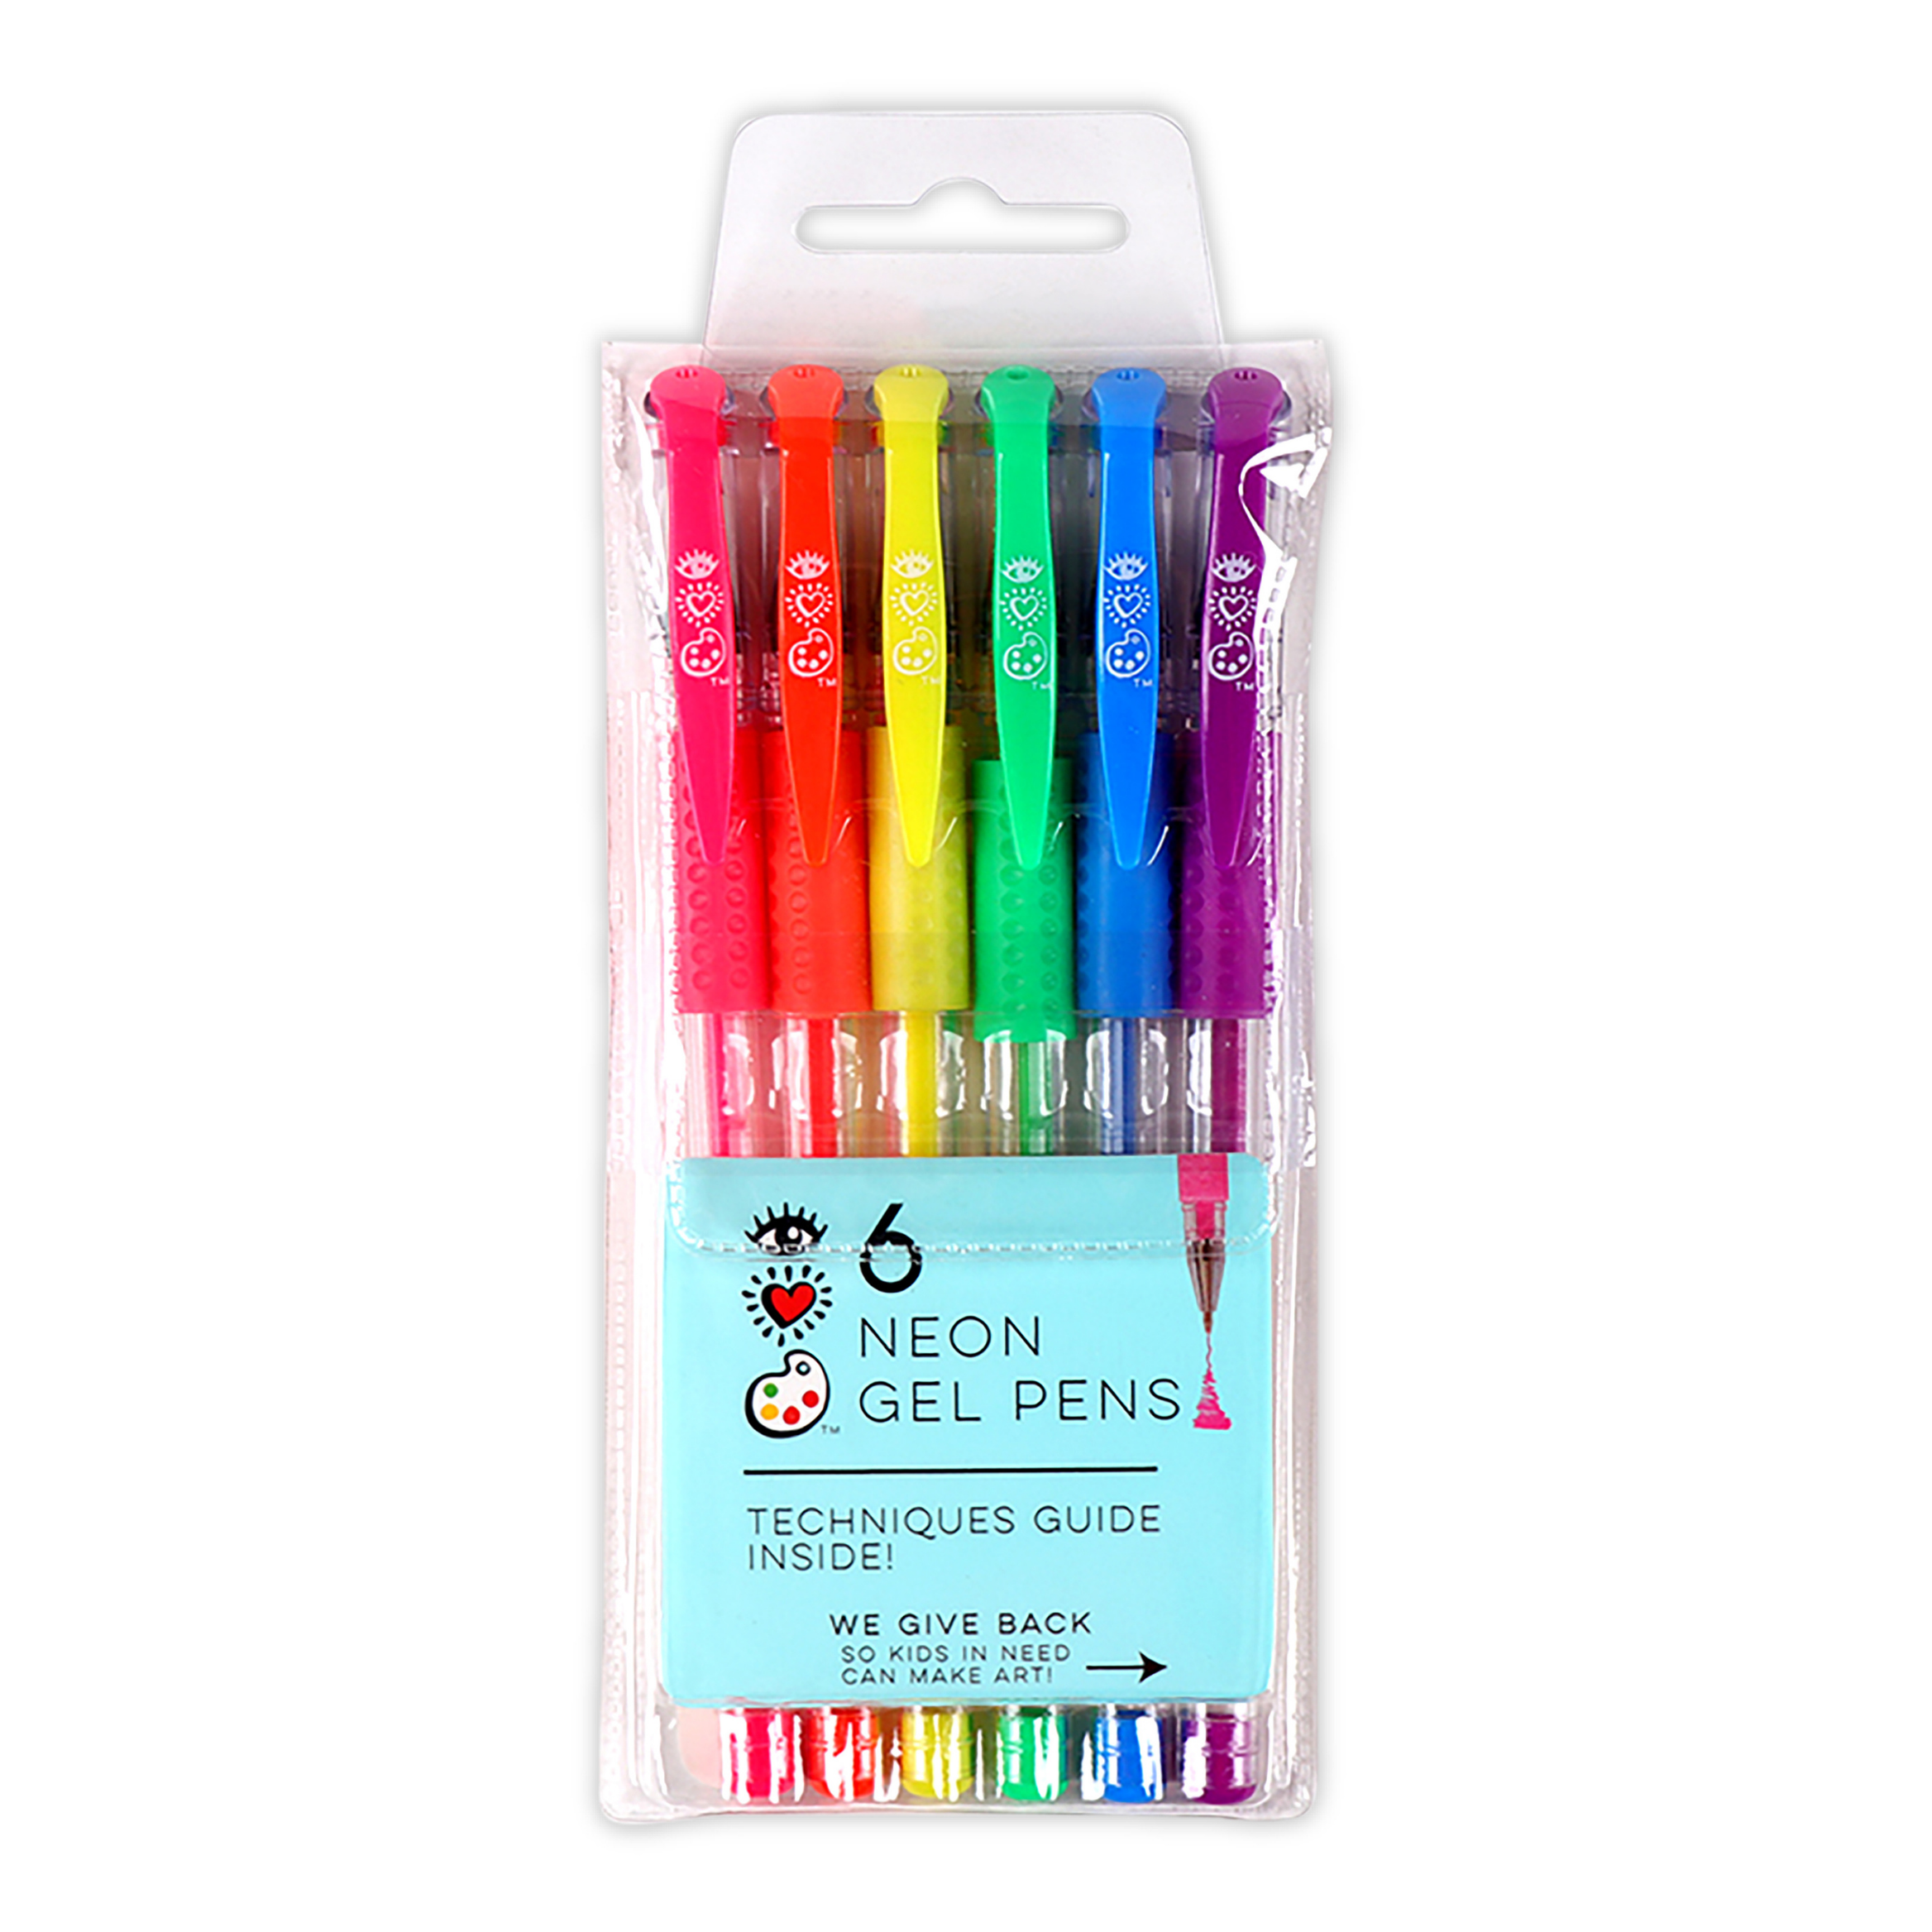 JR.WHITE Acrylic Paint Markers Pens Set of 12 Colors: Great for